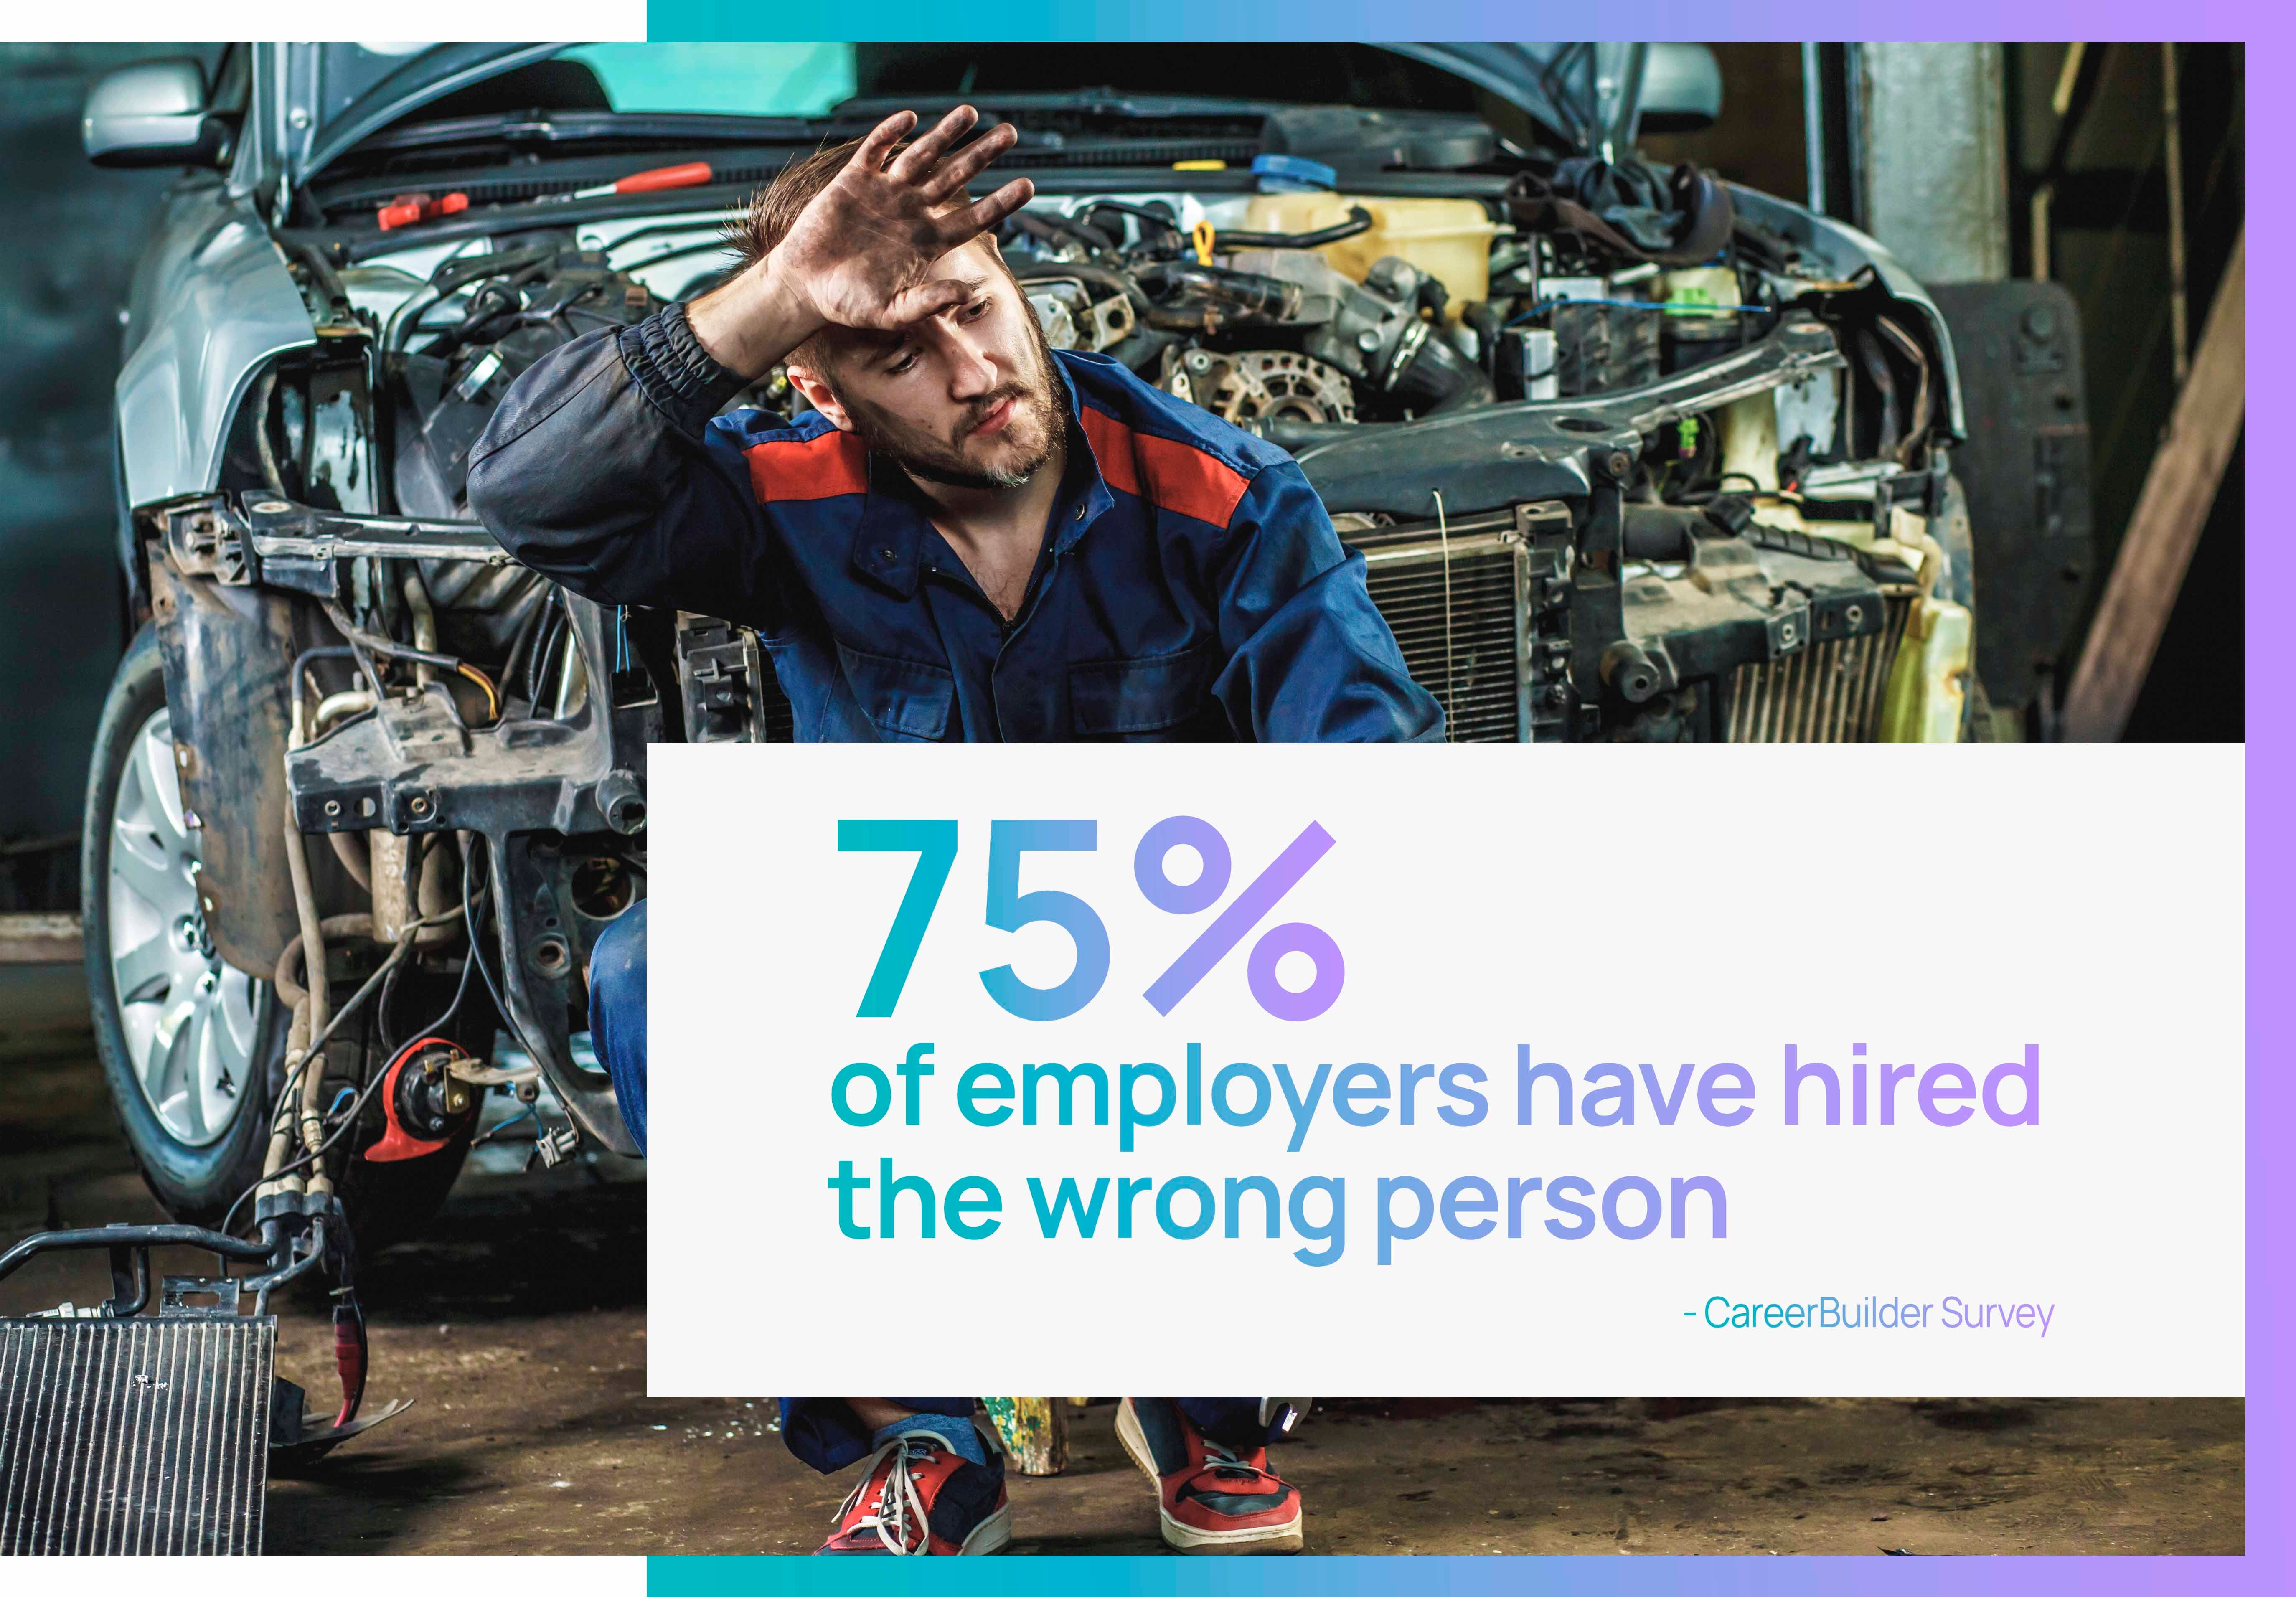 75% of employers have hired the wrong person statistic, CareerBuilder Survey